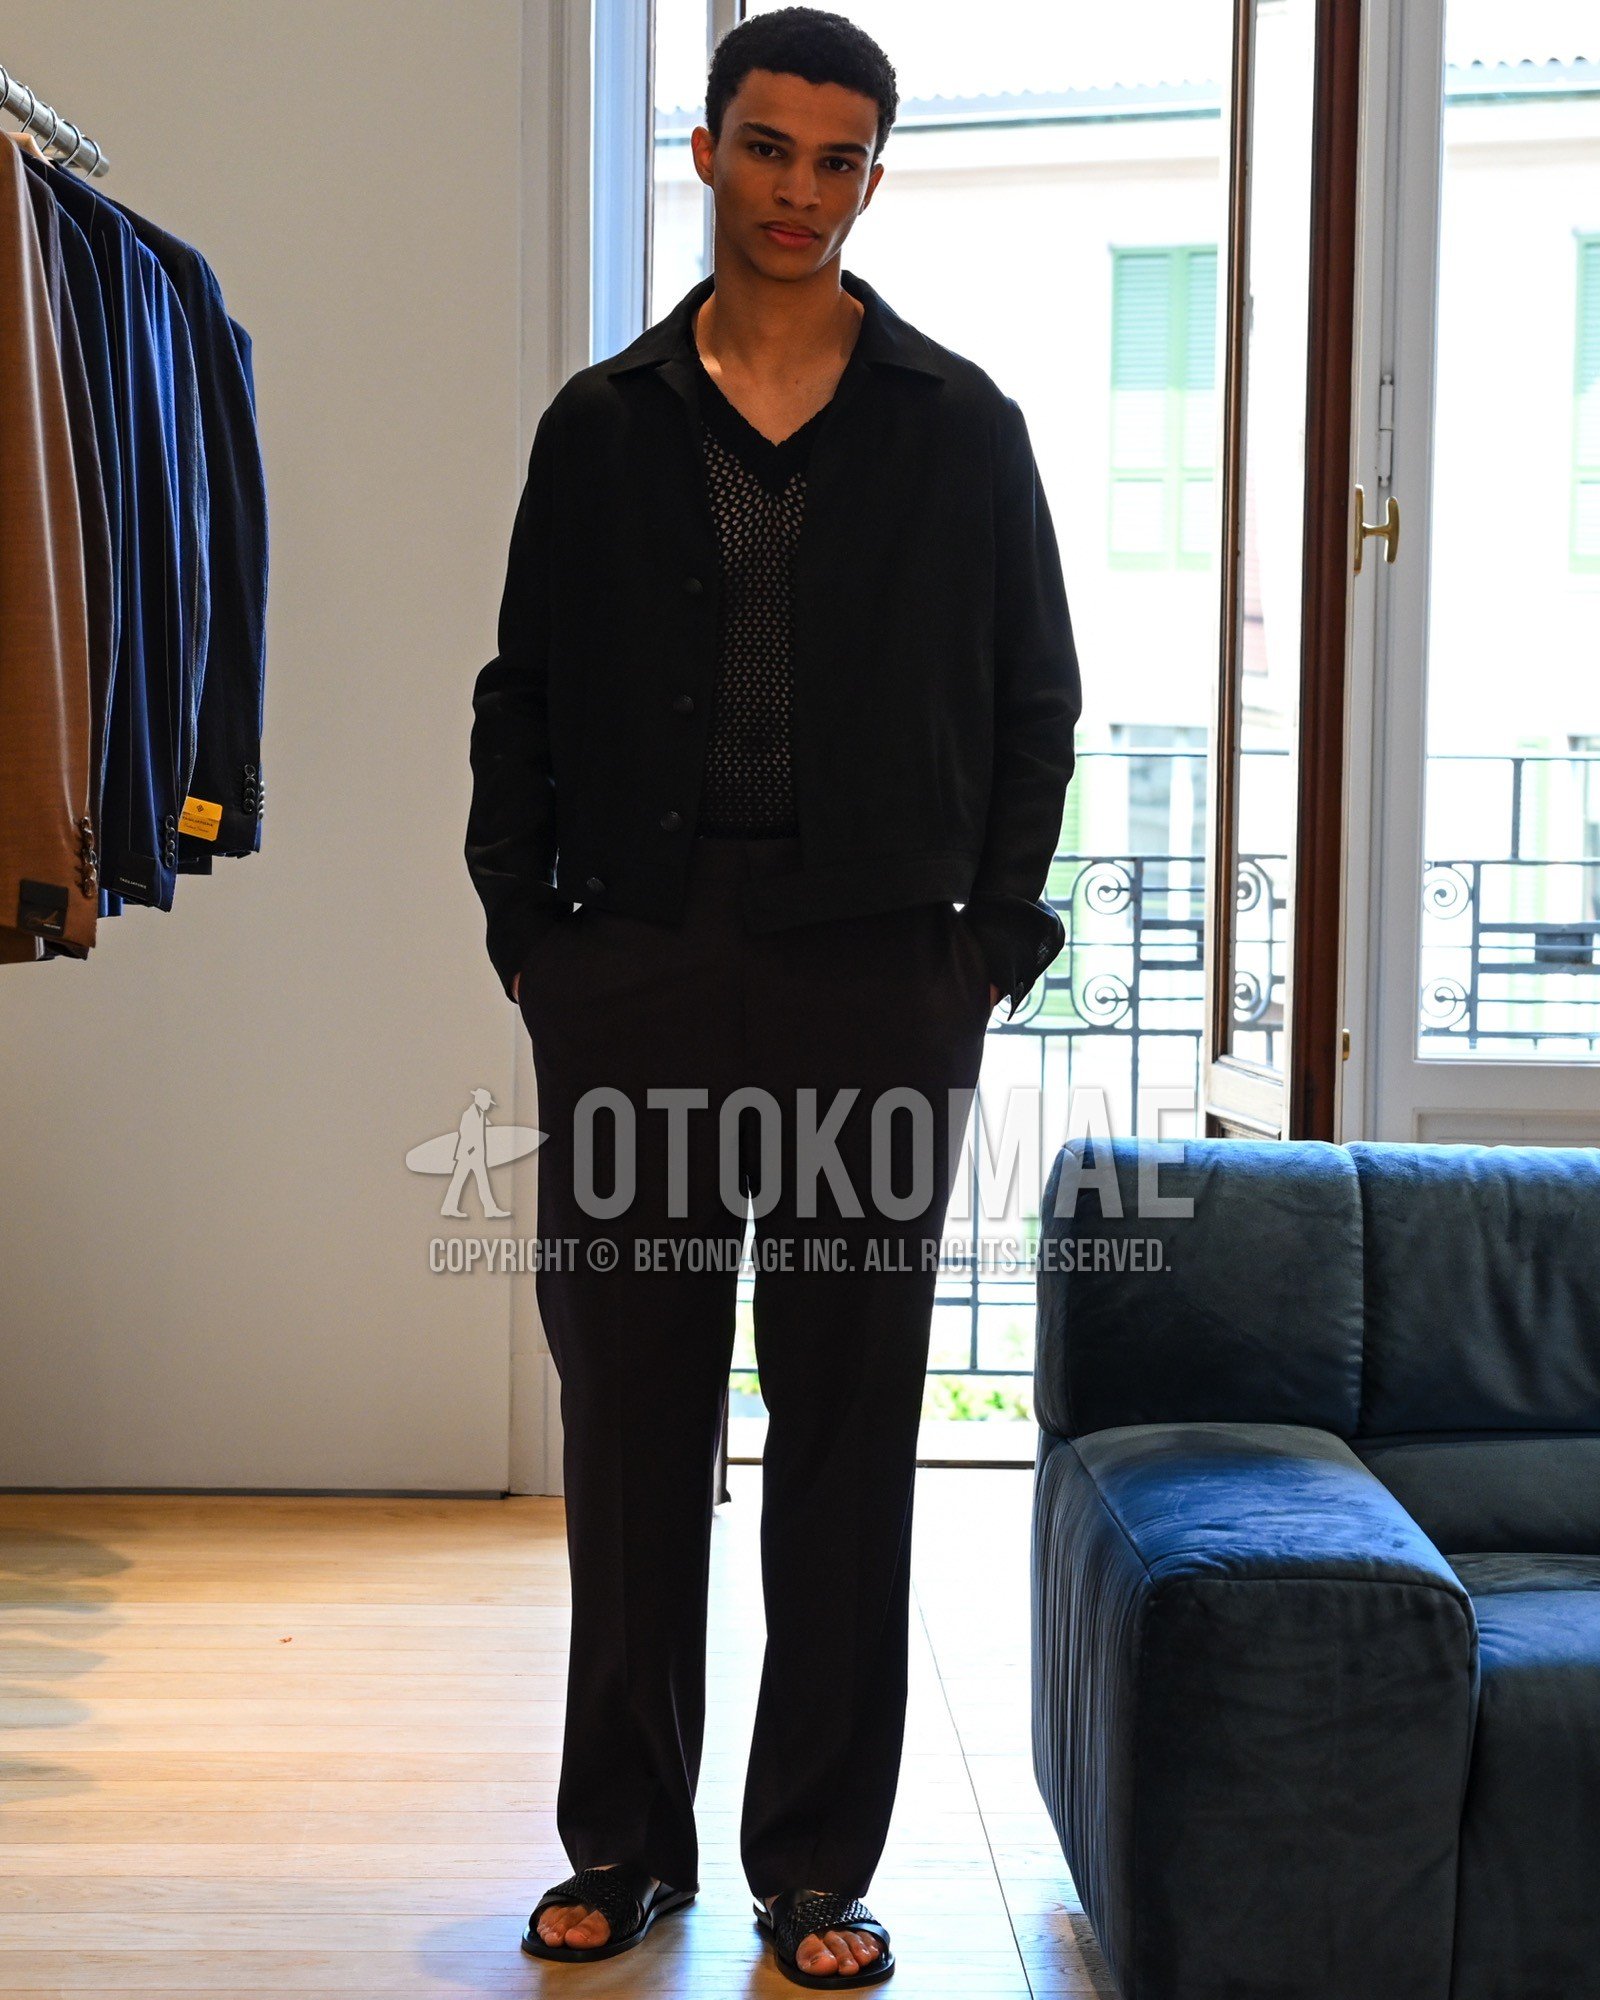 Men's spring summer autumn outfit with black plain coverall, black plain t-shirt, black plain slacks, black shower sandals.